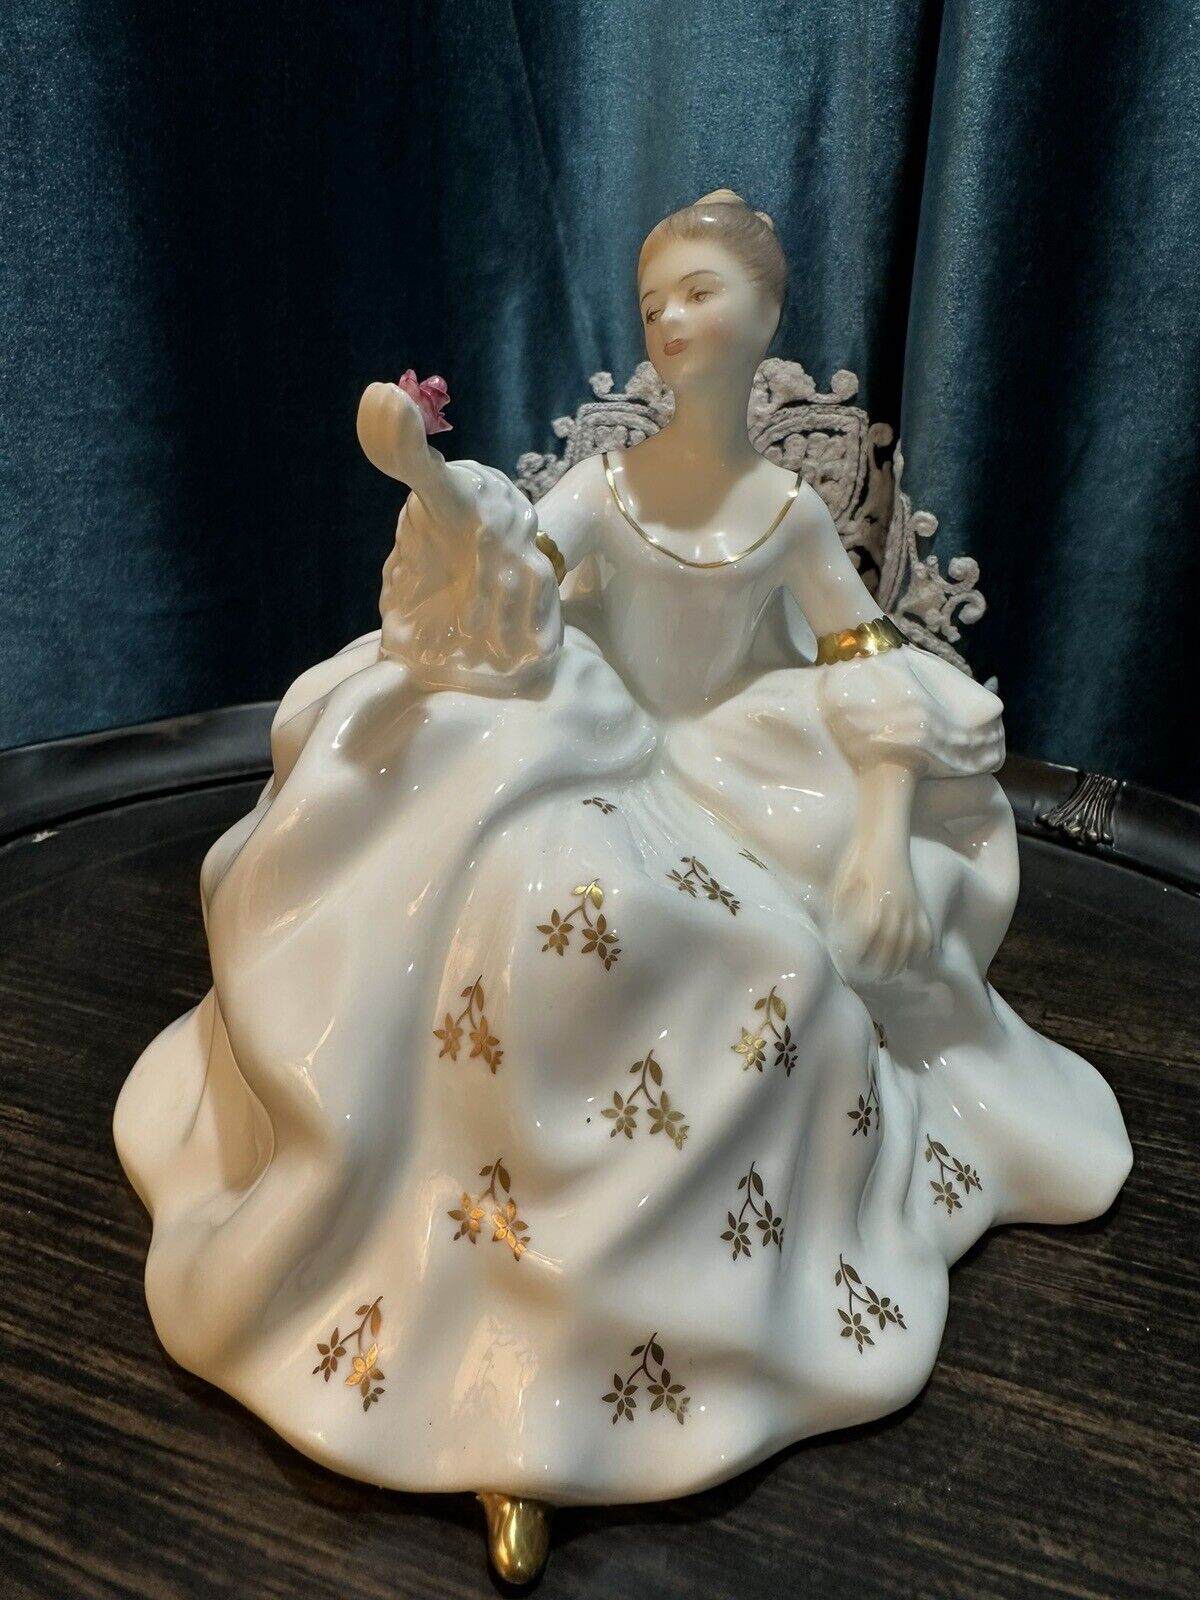 Stunning Vintage Royal Doulton Figurine, Excellent Condition